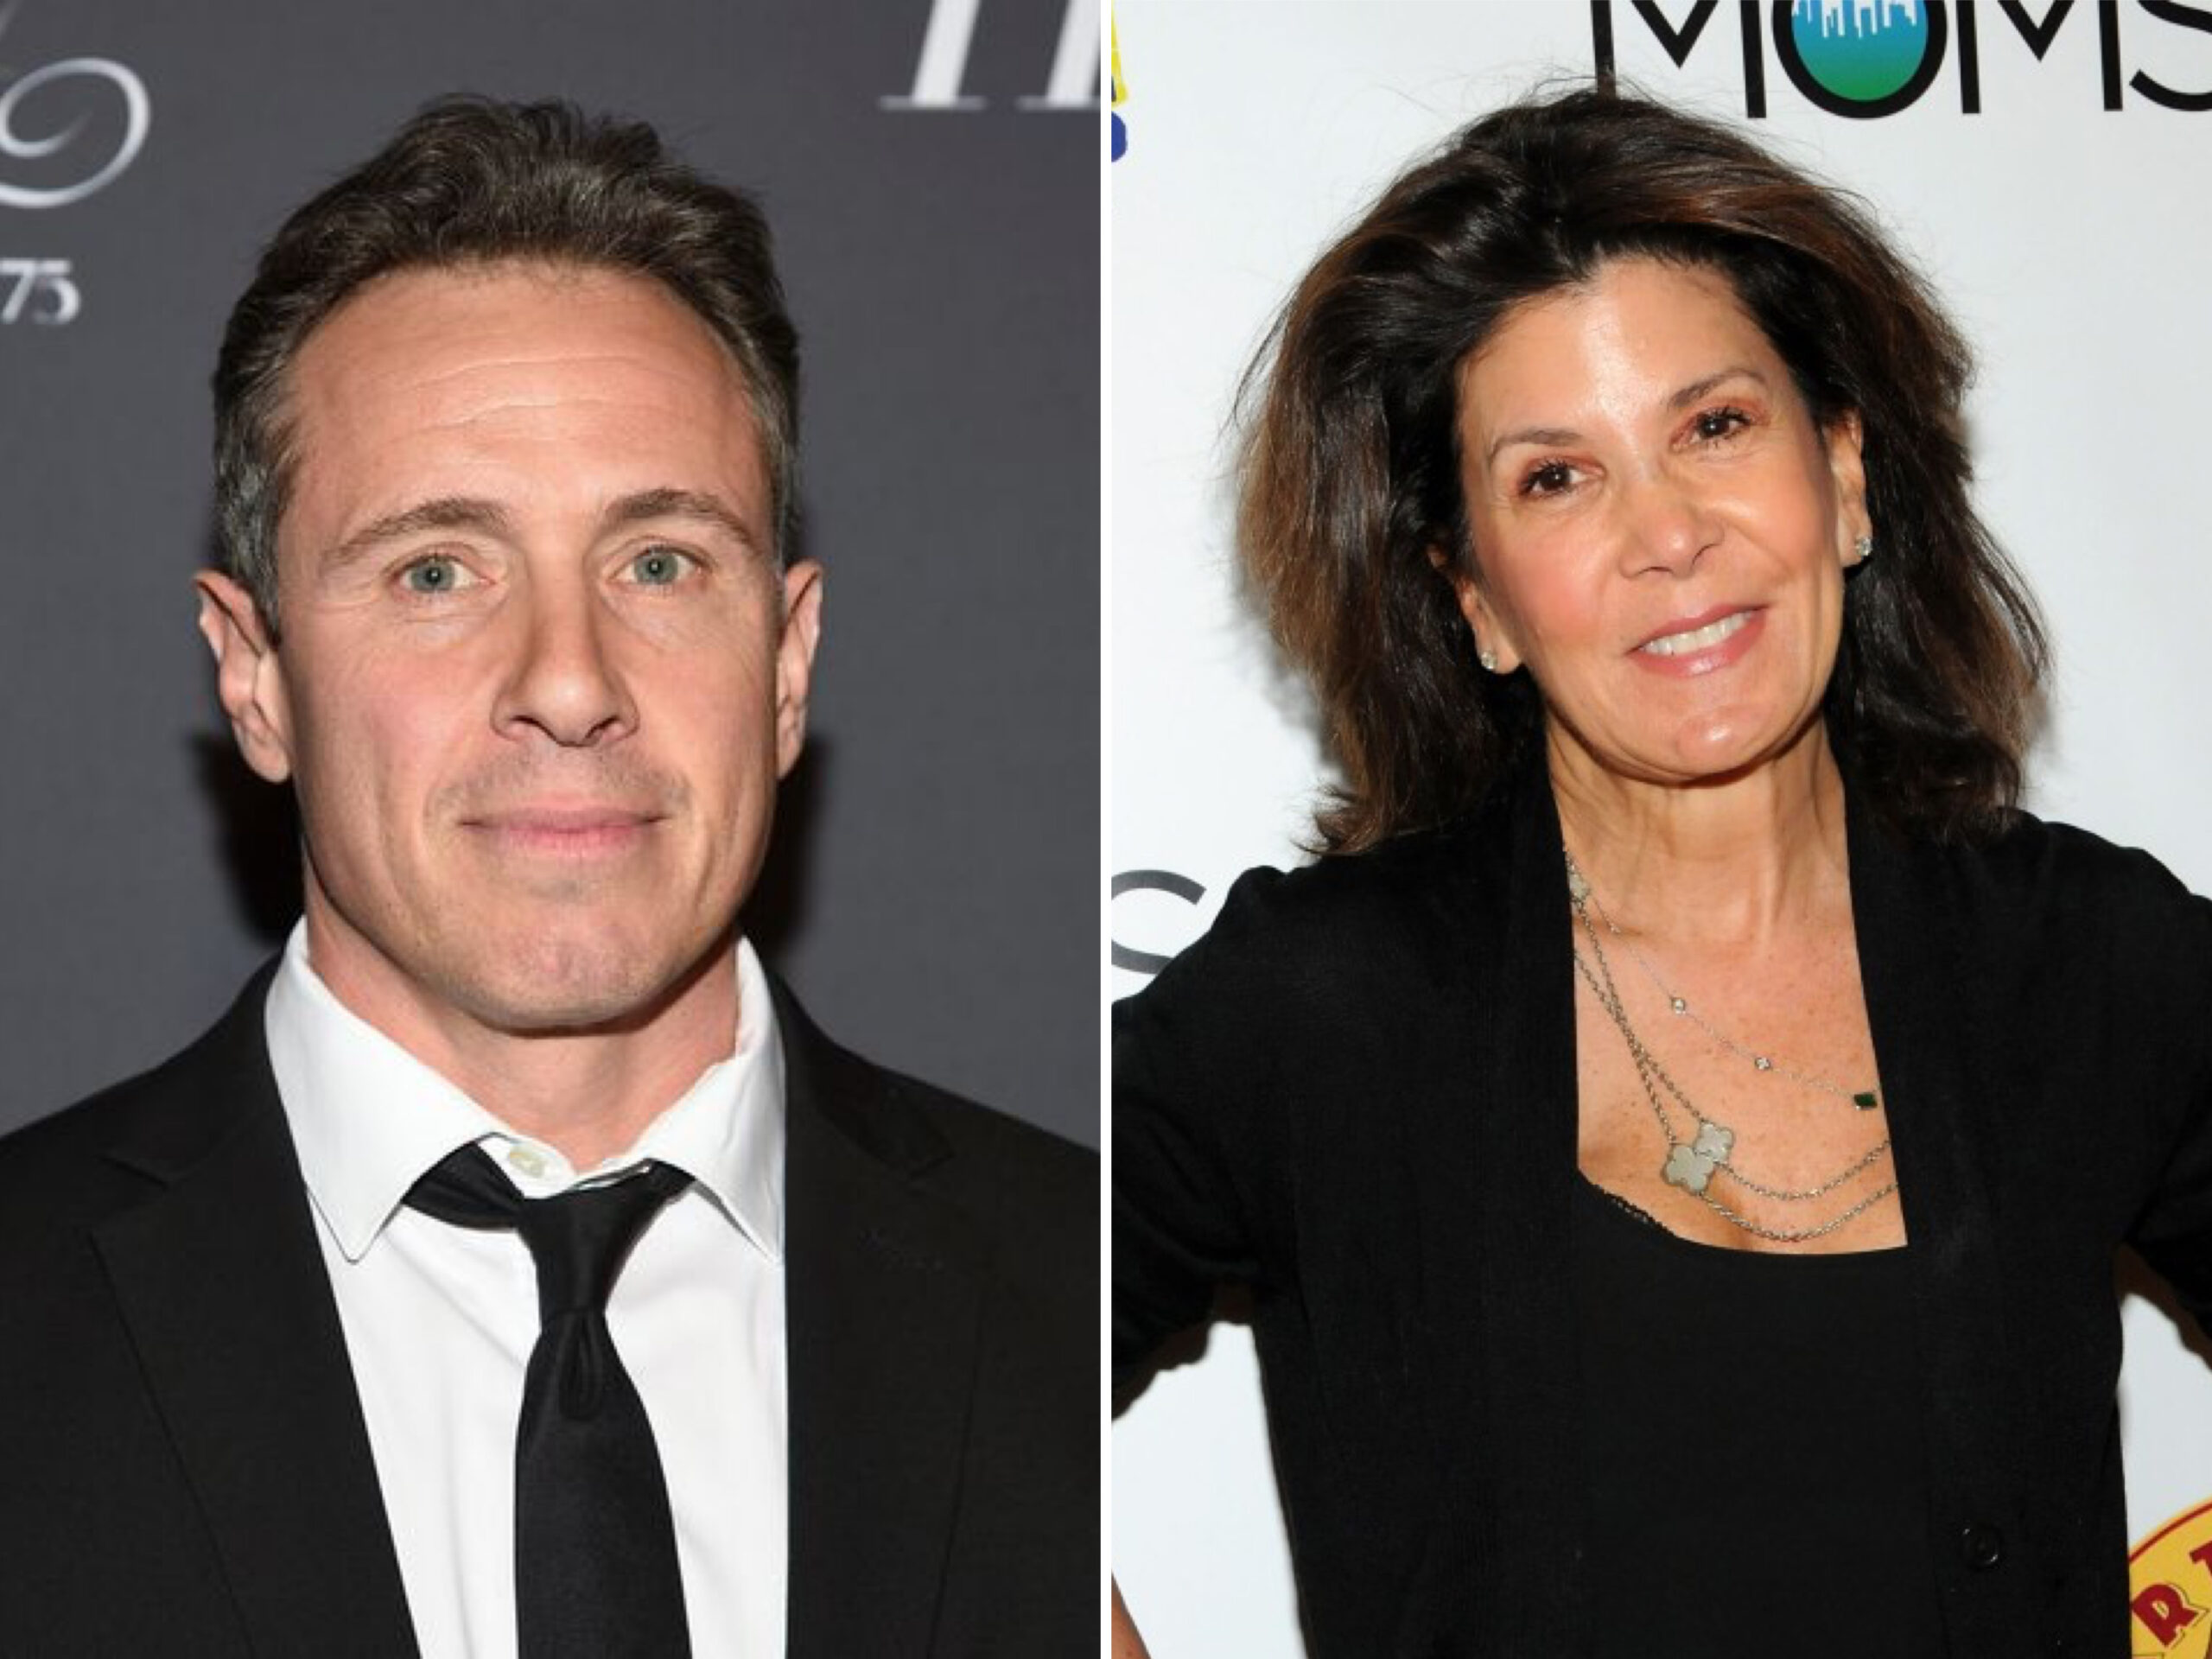 Chris Cuomo’s Former Boss Accuses Him Of Sexually Harassing Her